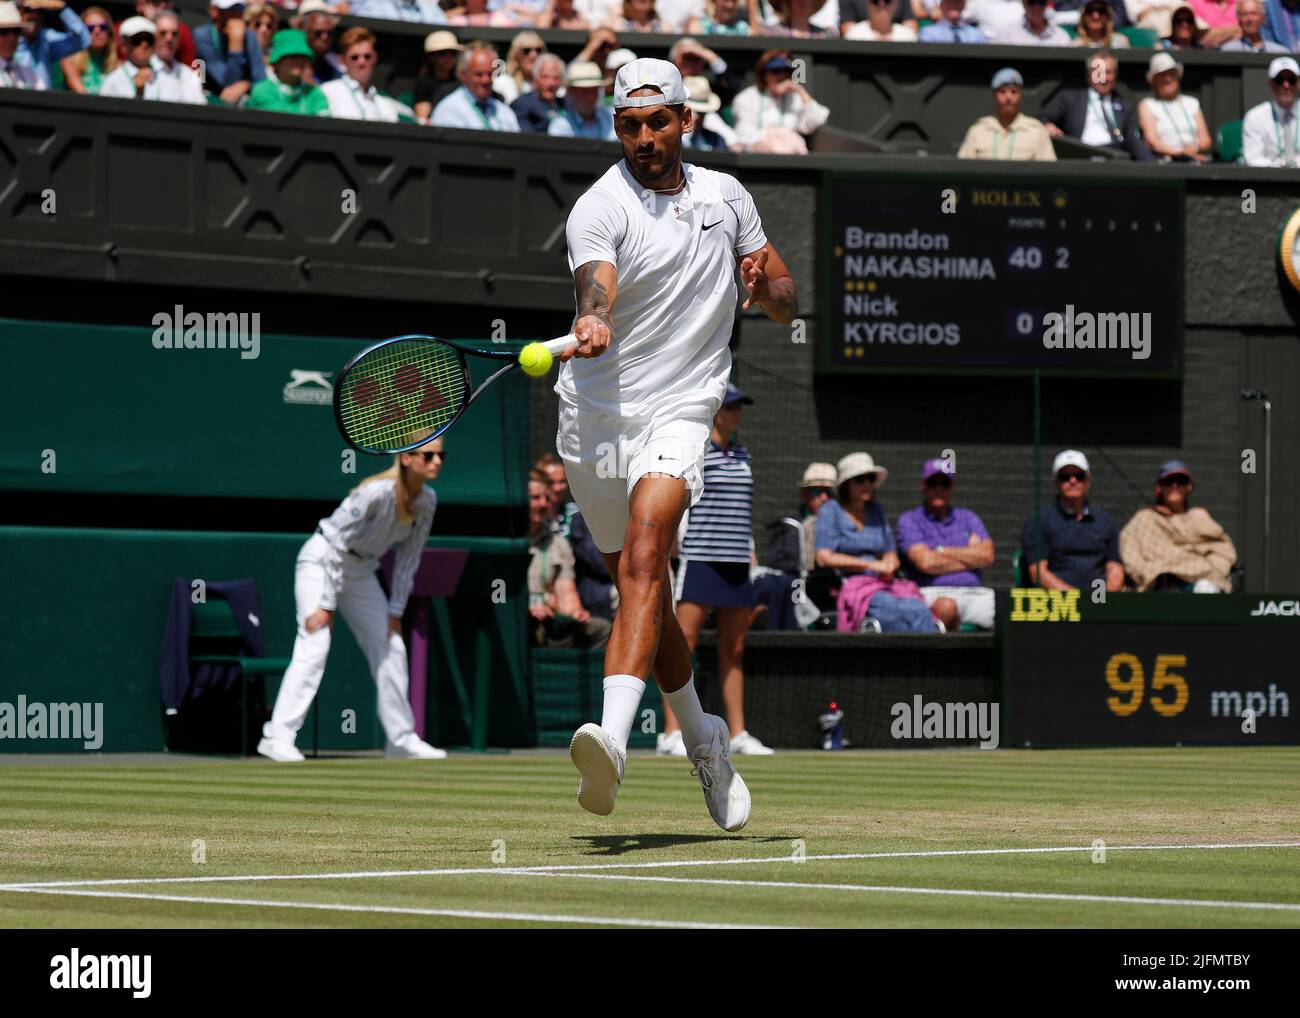 London, UK. 4th July 2022, All England Lawn Tennis and Croquet Club,  London, England; Wimbledon Tennis tournament; Nick Kyrgios (AUS) plays a  forehand to Brandon Nakashima (USA) Credit: Action Plus Sports Images/Alamy